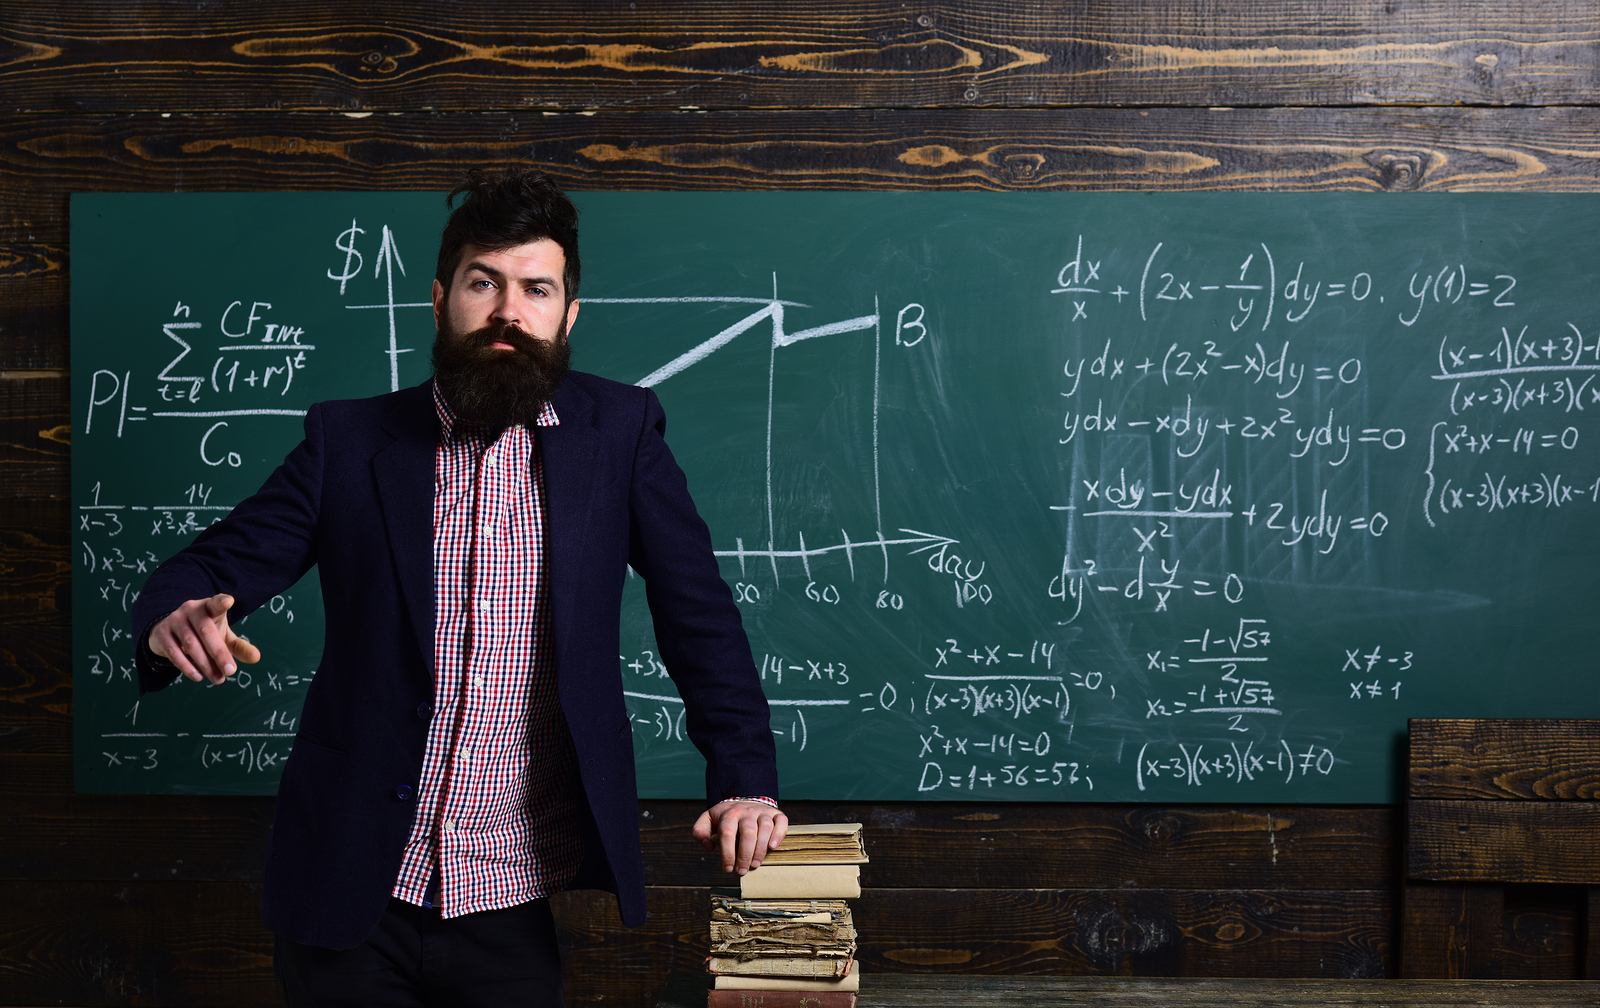 Man in front of chalkboard with math equations